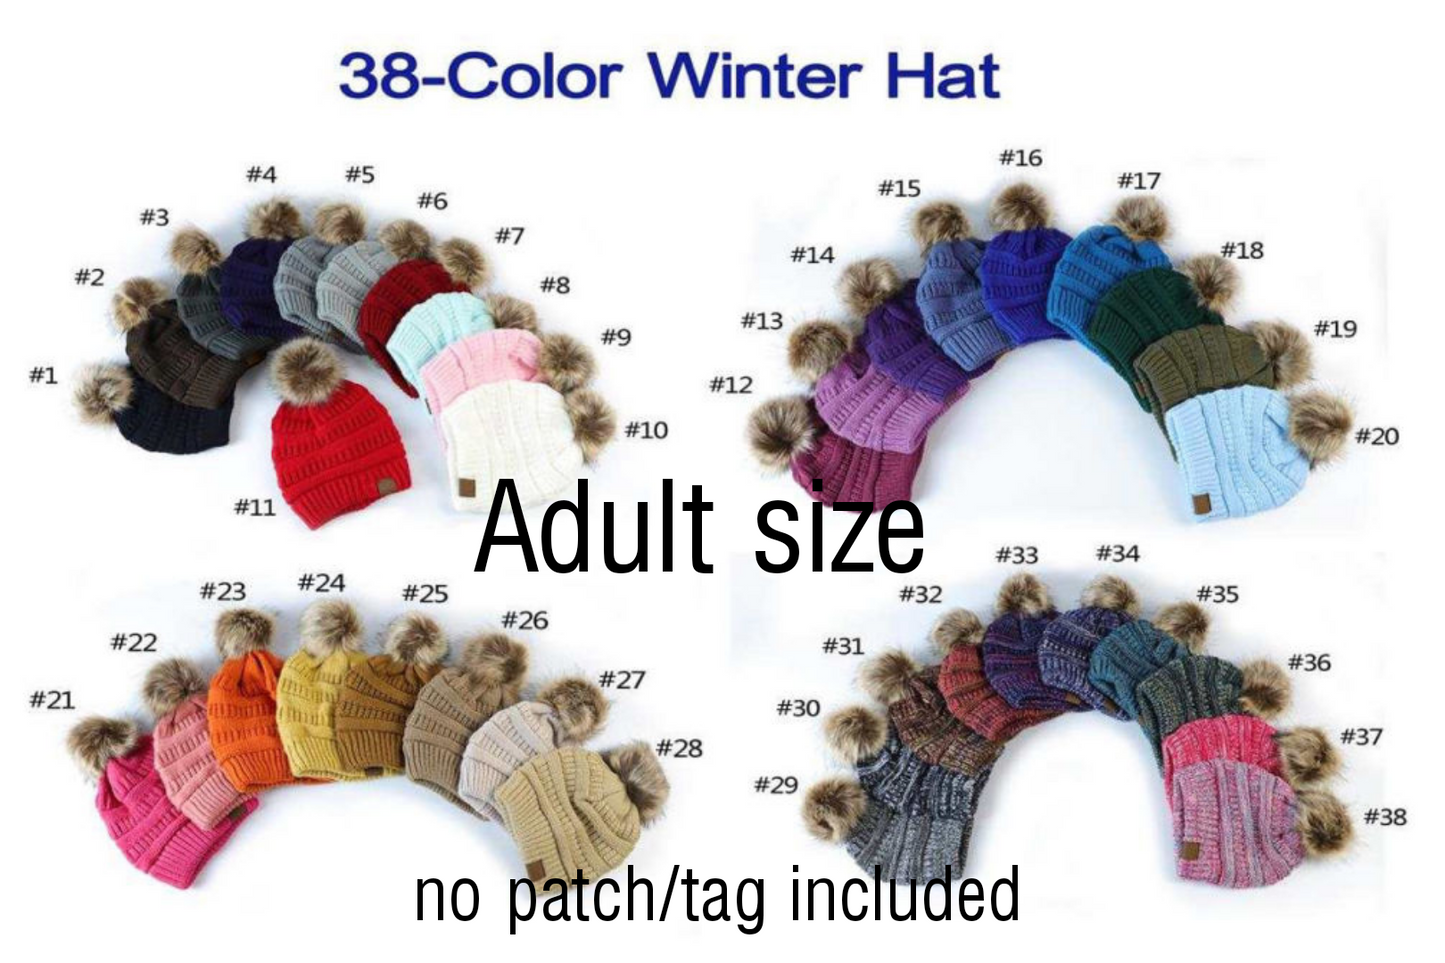 ADULT Cable Knit Beanie Hats BLANK no patch/tag RTS, multiple color options cable knit beanie stocking cap, knitted hats with fur pom pom